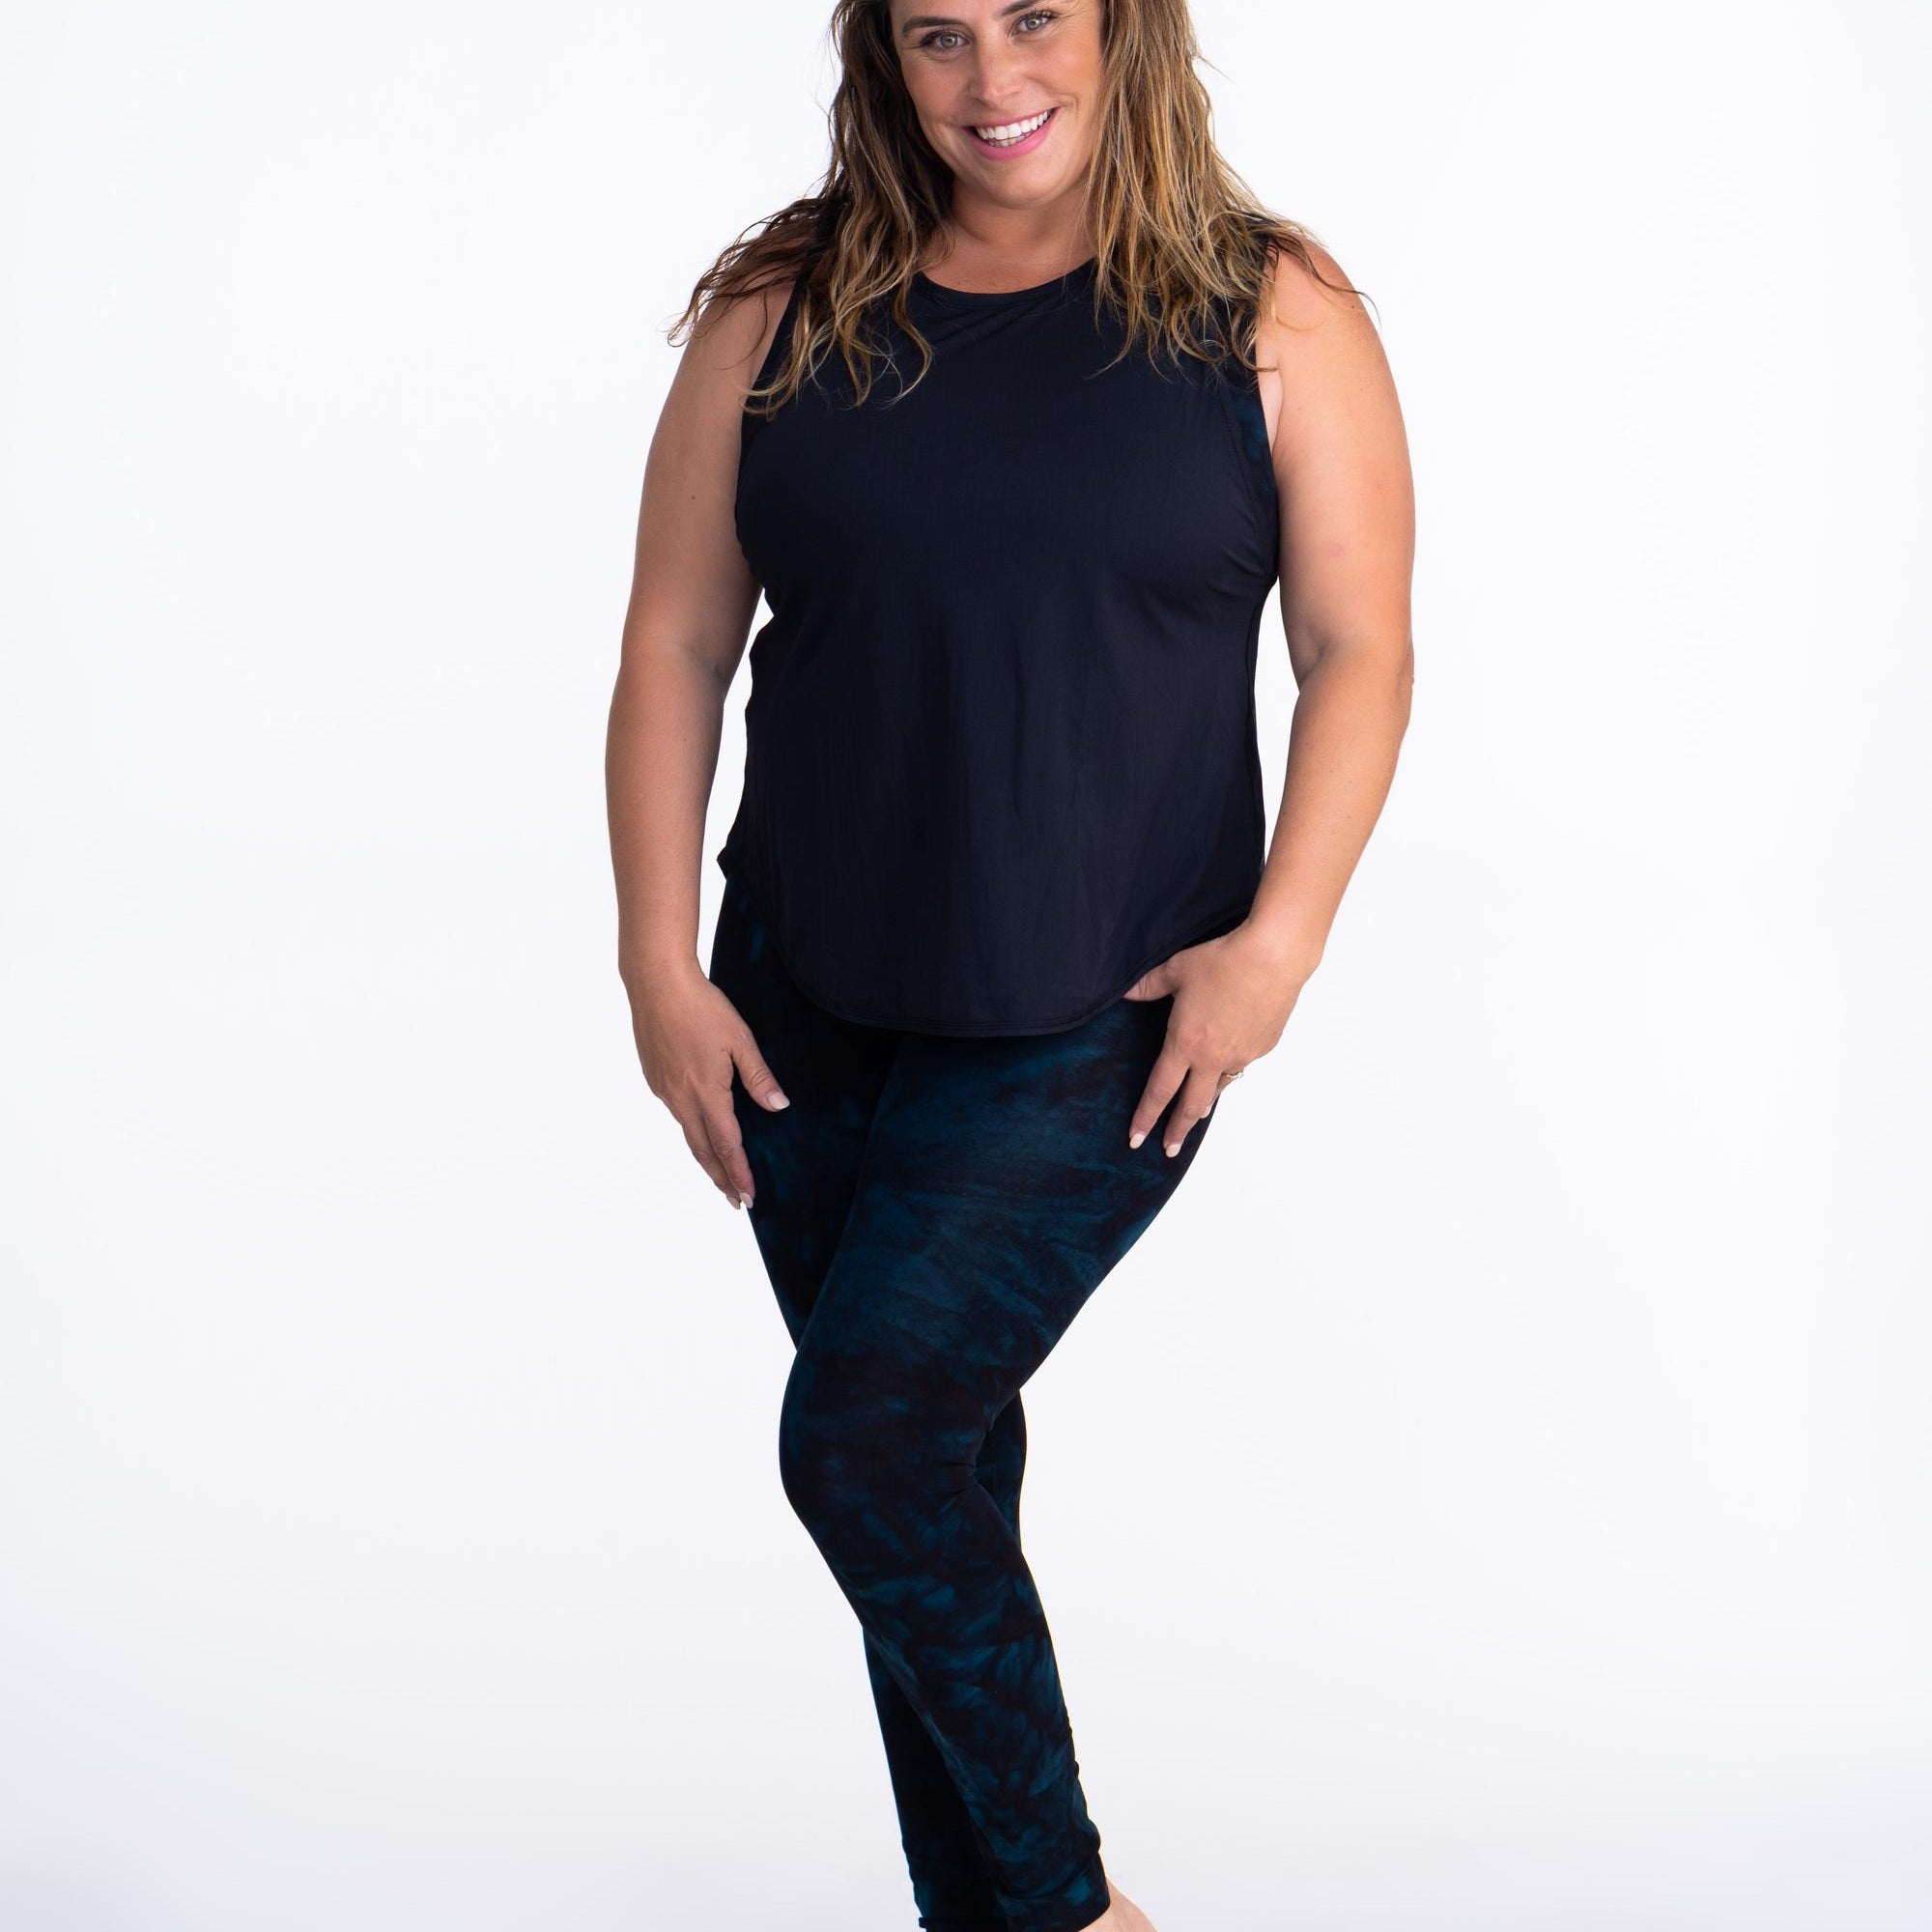 Leggings - Bali Chill Out Deep Teal